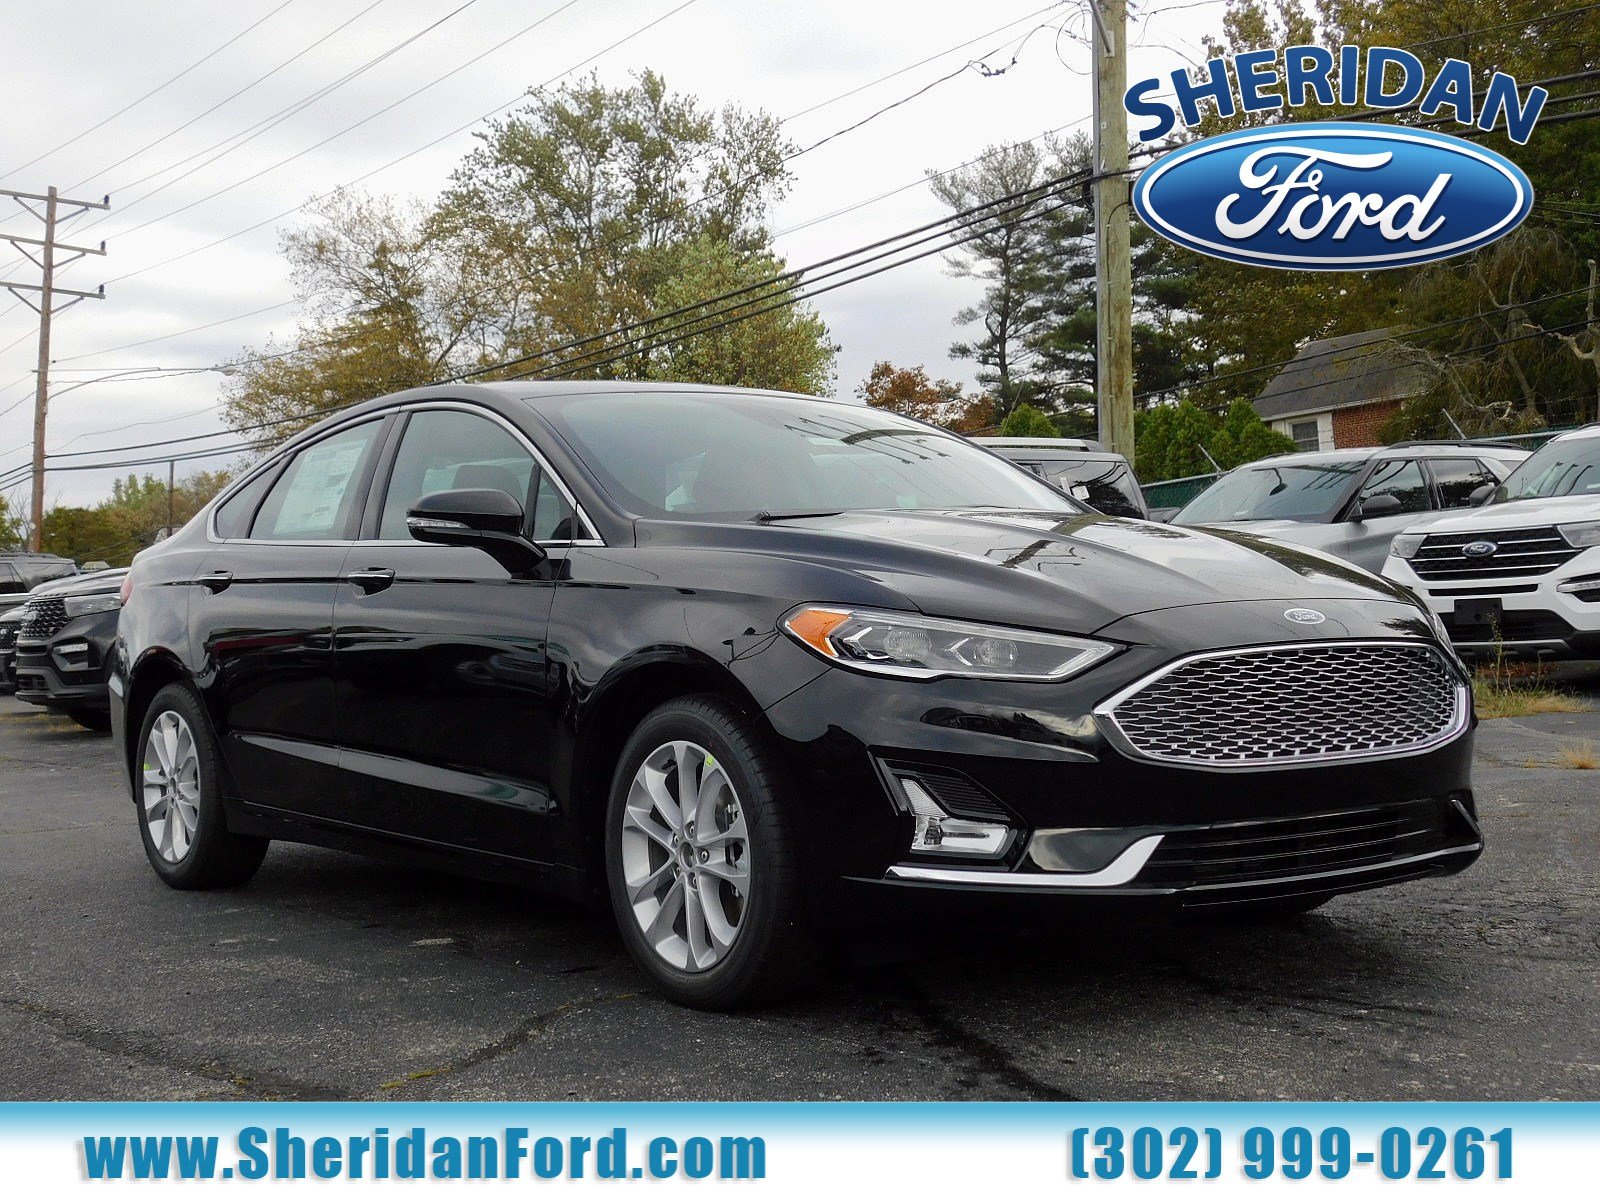 New 2020 Ford Fusion Energi Titanium With Navigation